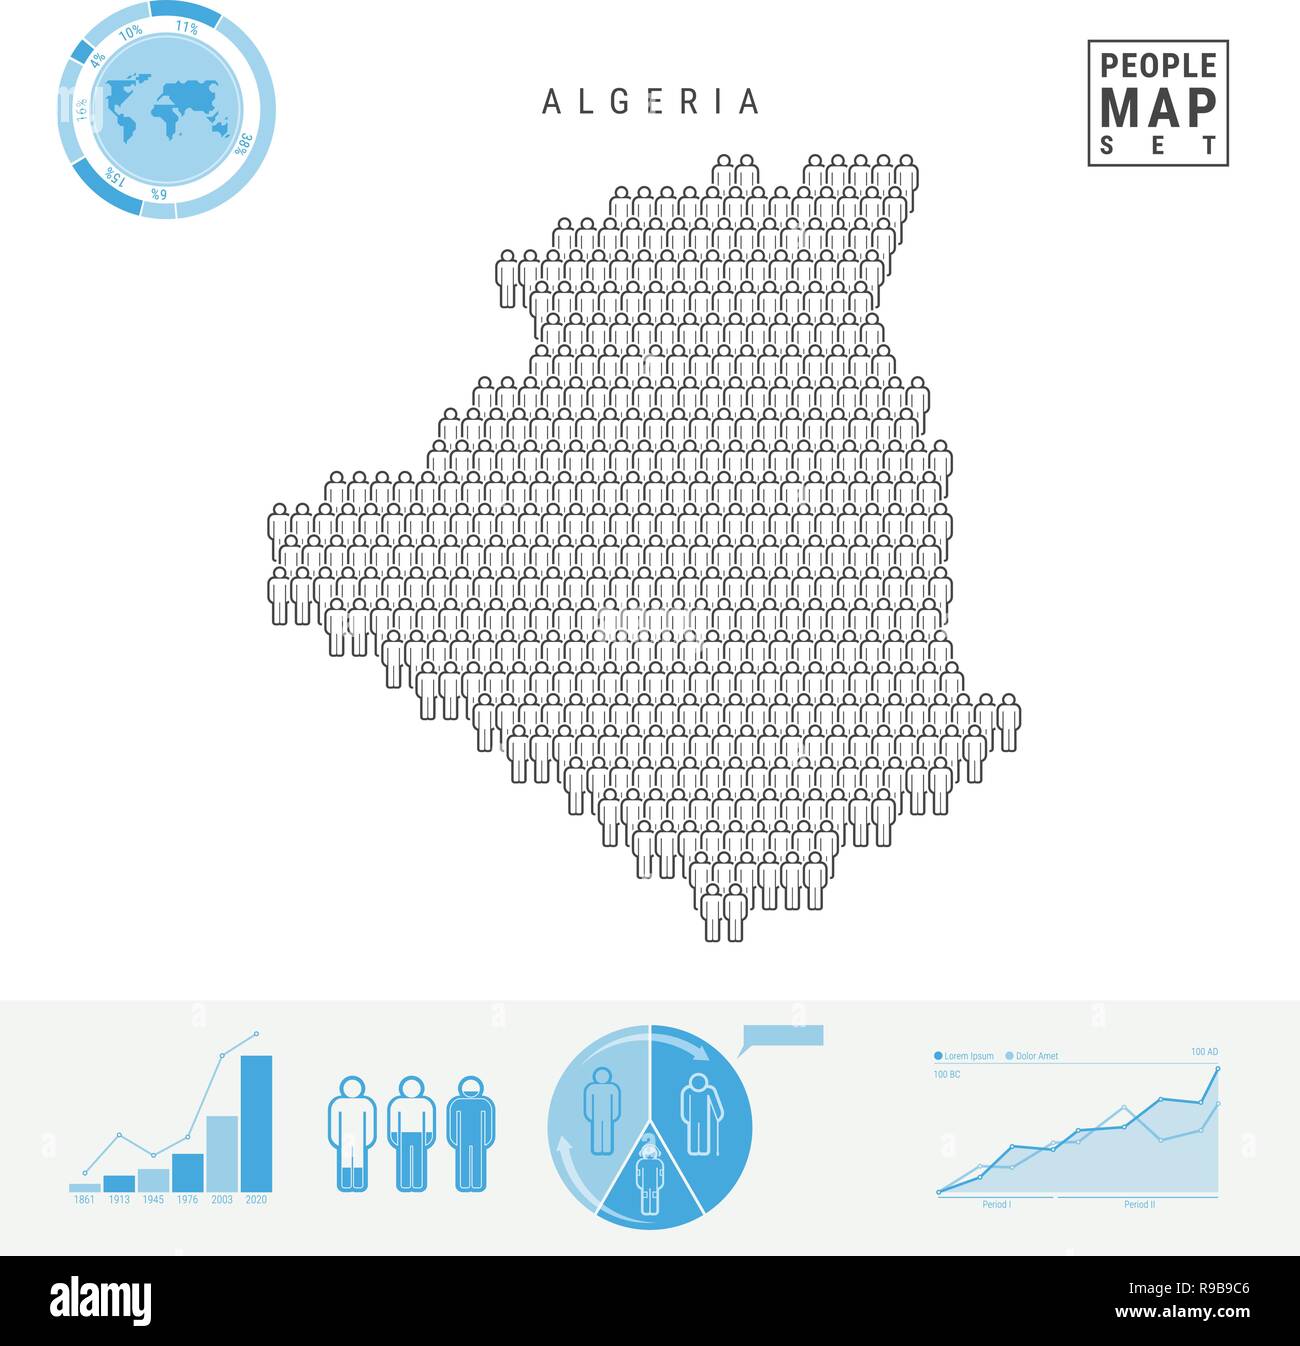 Algeria People Icon Map. People Crowd in the Shape of a Map of Algeria. Stylized Silhouette of Algeria. Population Growth and Aging Infographic Elemen Stock Vector